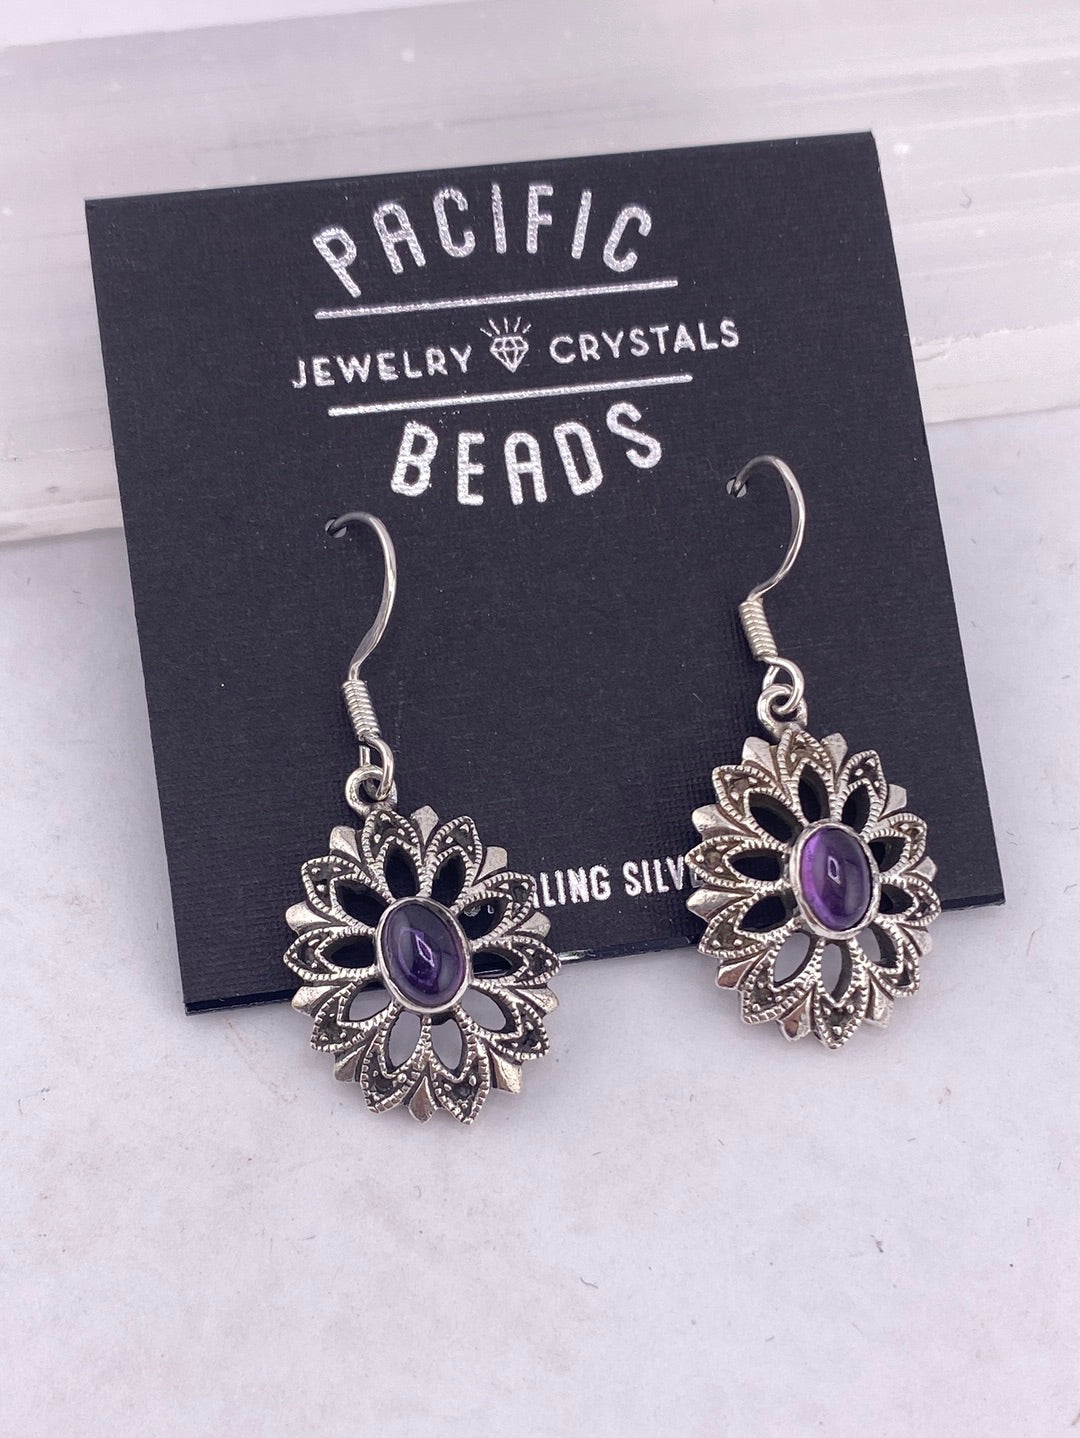 Pacific Beads amethyst jewelry